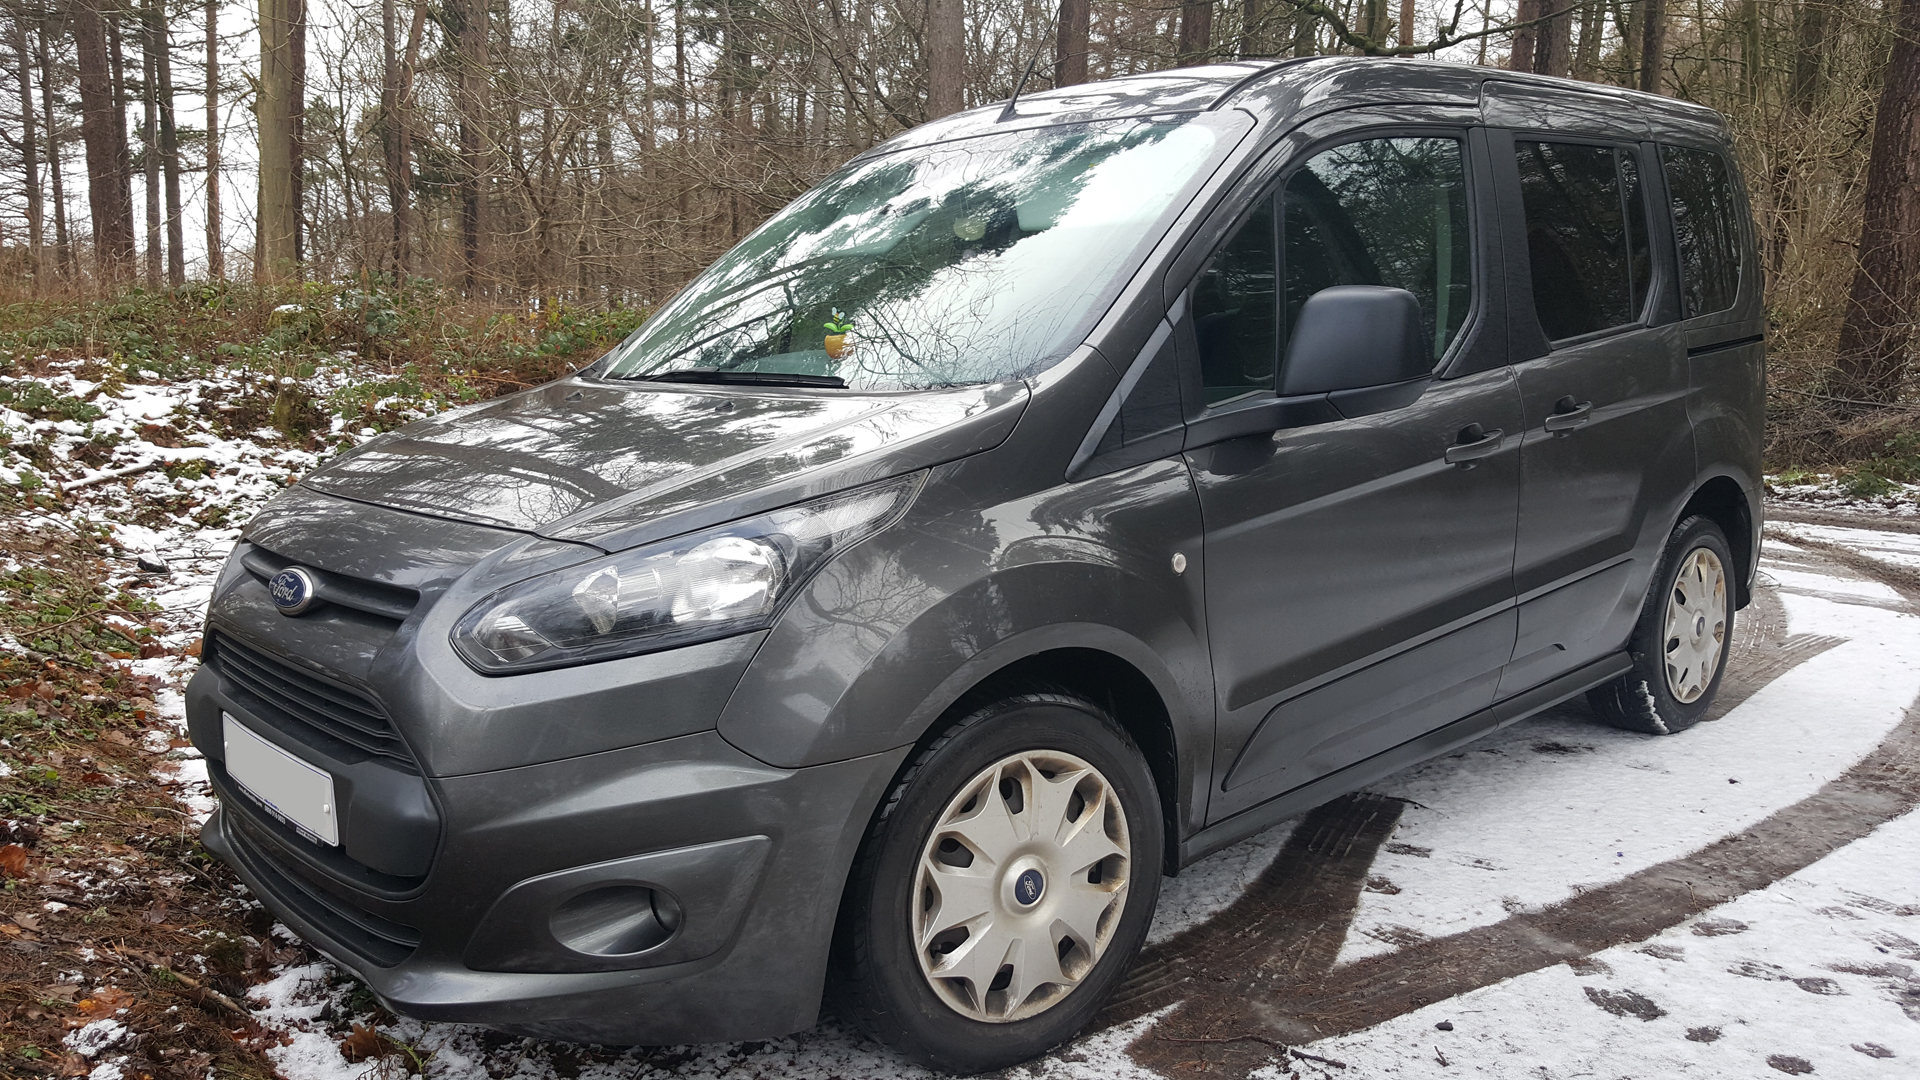 Ford Connect Freedom™ WAV parked on a snowy road surrounded by snow covered trees: 6 Top Tips How to Choose The Best Wheelchair Accessible Vehicle (WAV)